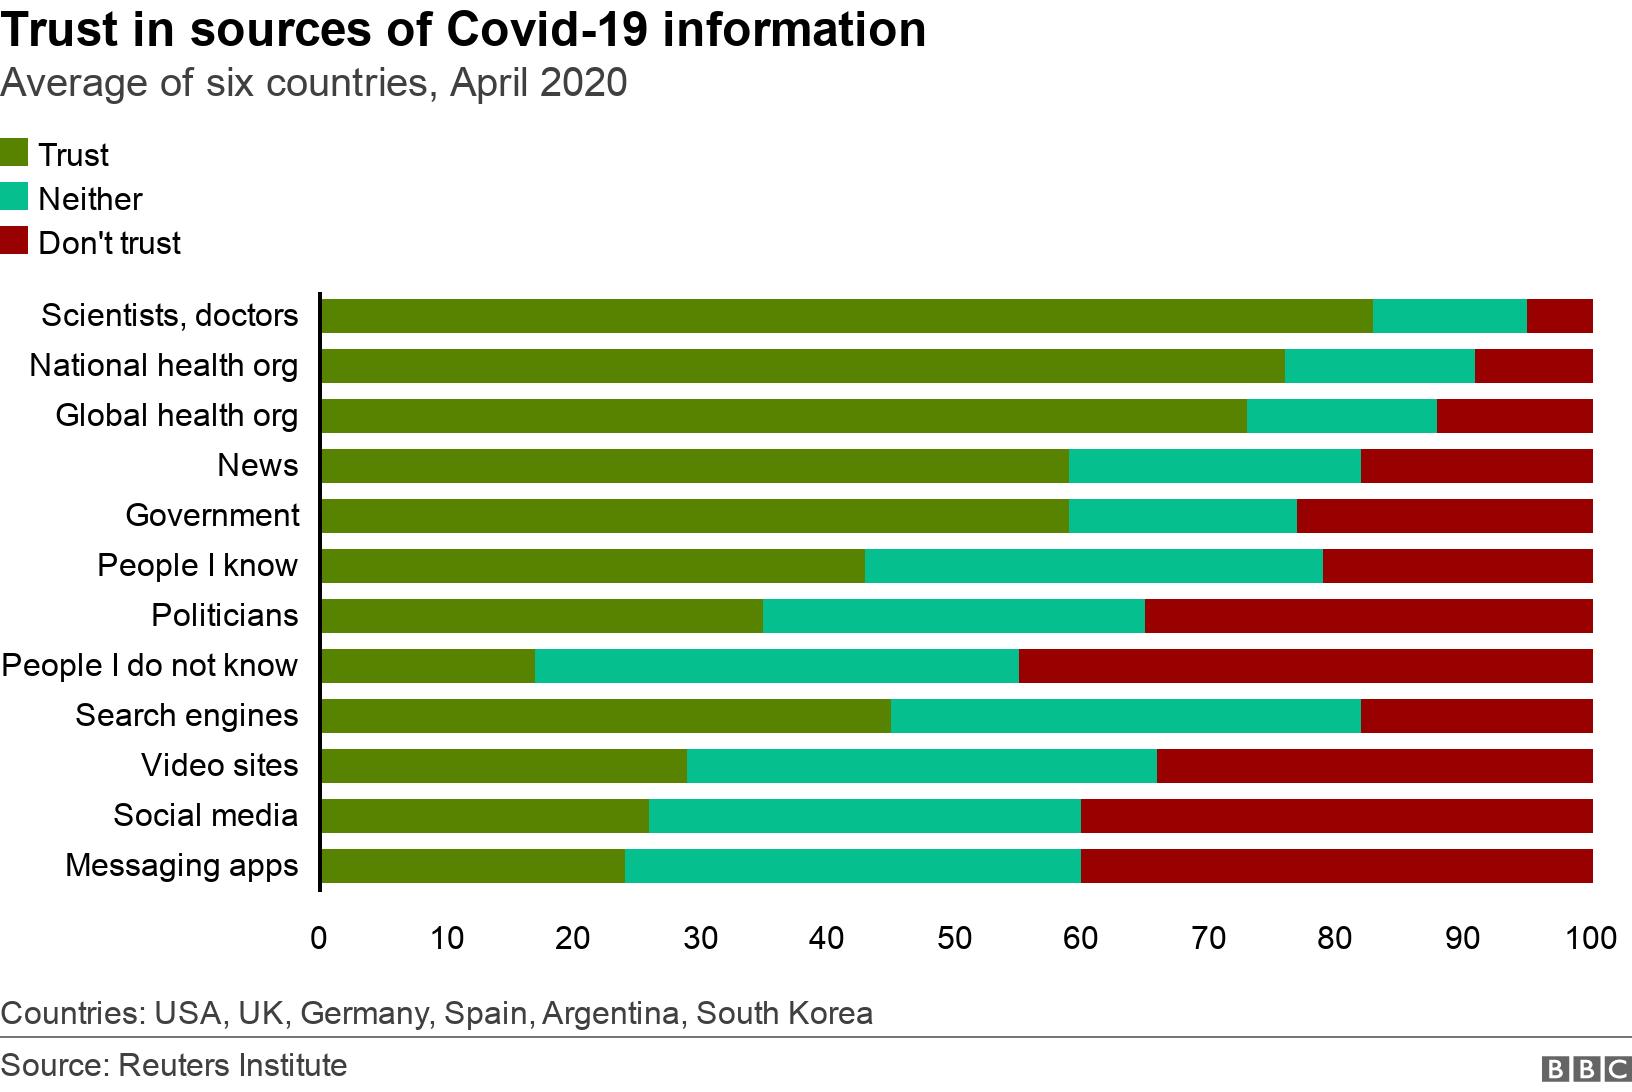 Trust in sources of Covid-19 information. Average of six countries, April 2020. Countries: USA, UK, Germany, Spain, Argentina, South Korea.